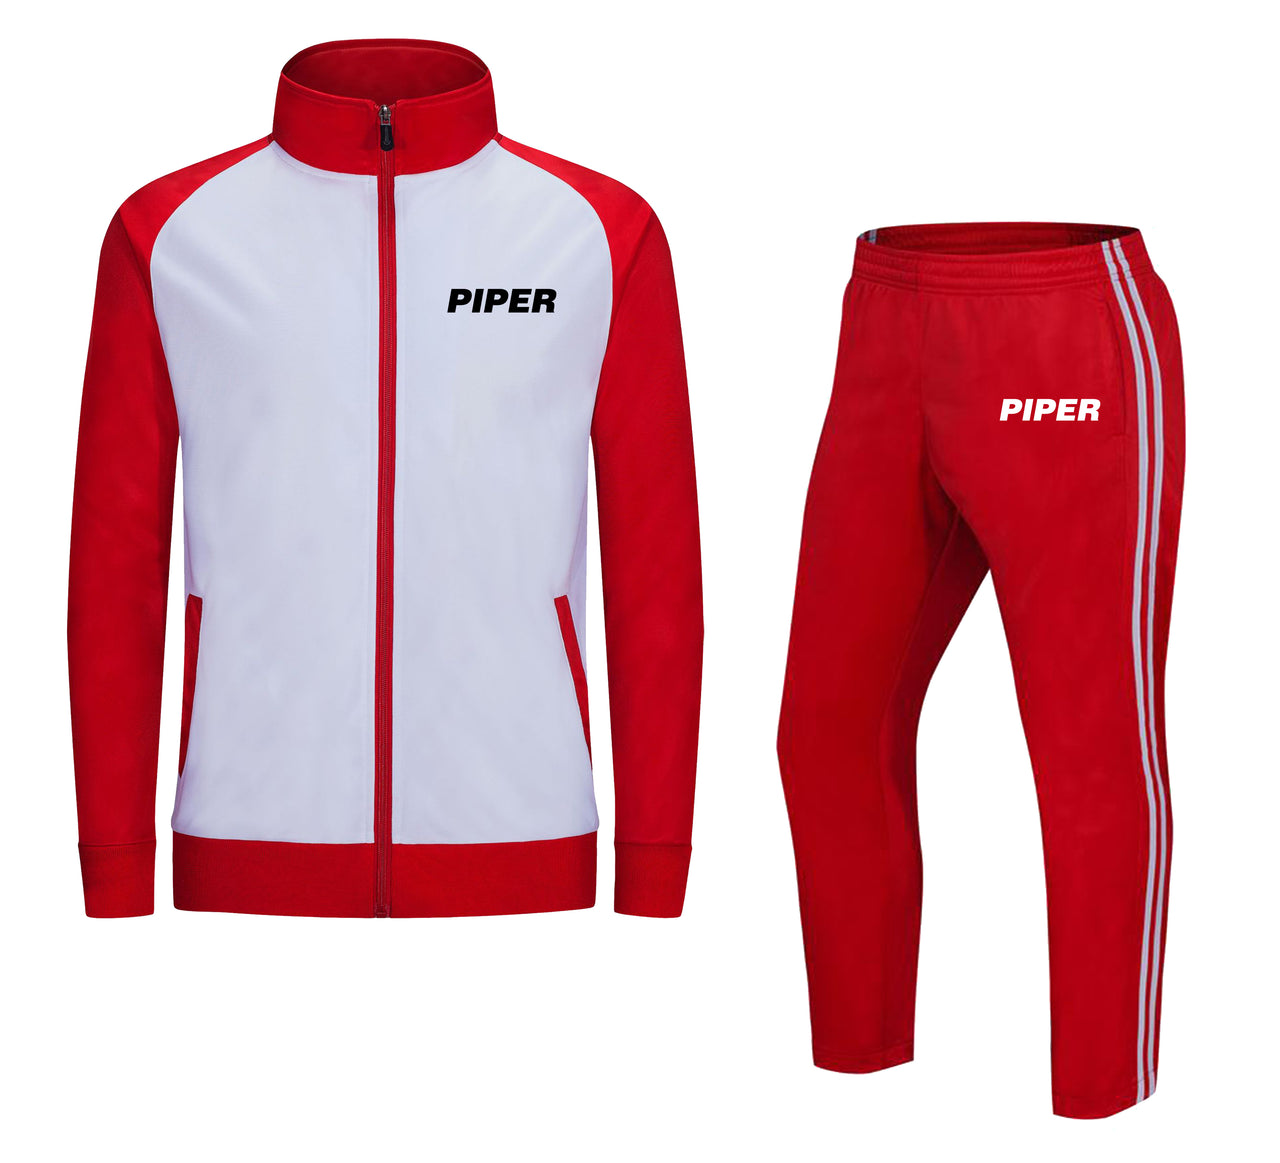 Piper & Text Designed "CHILDREN" Tracksuits